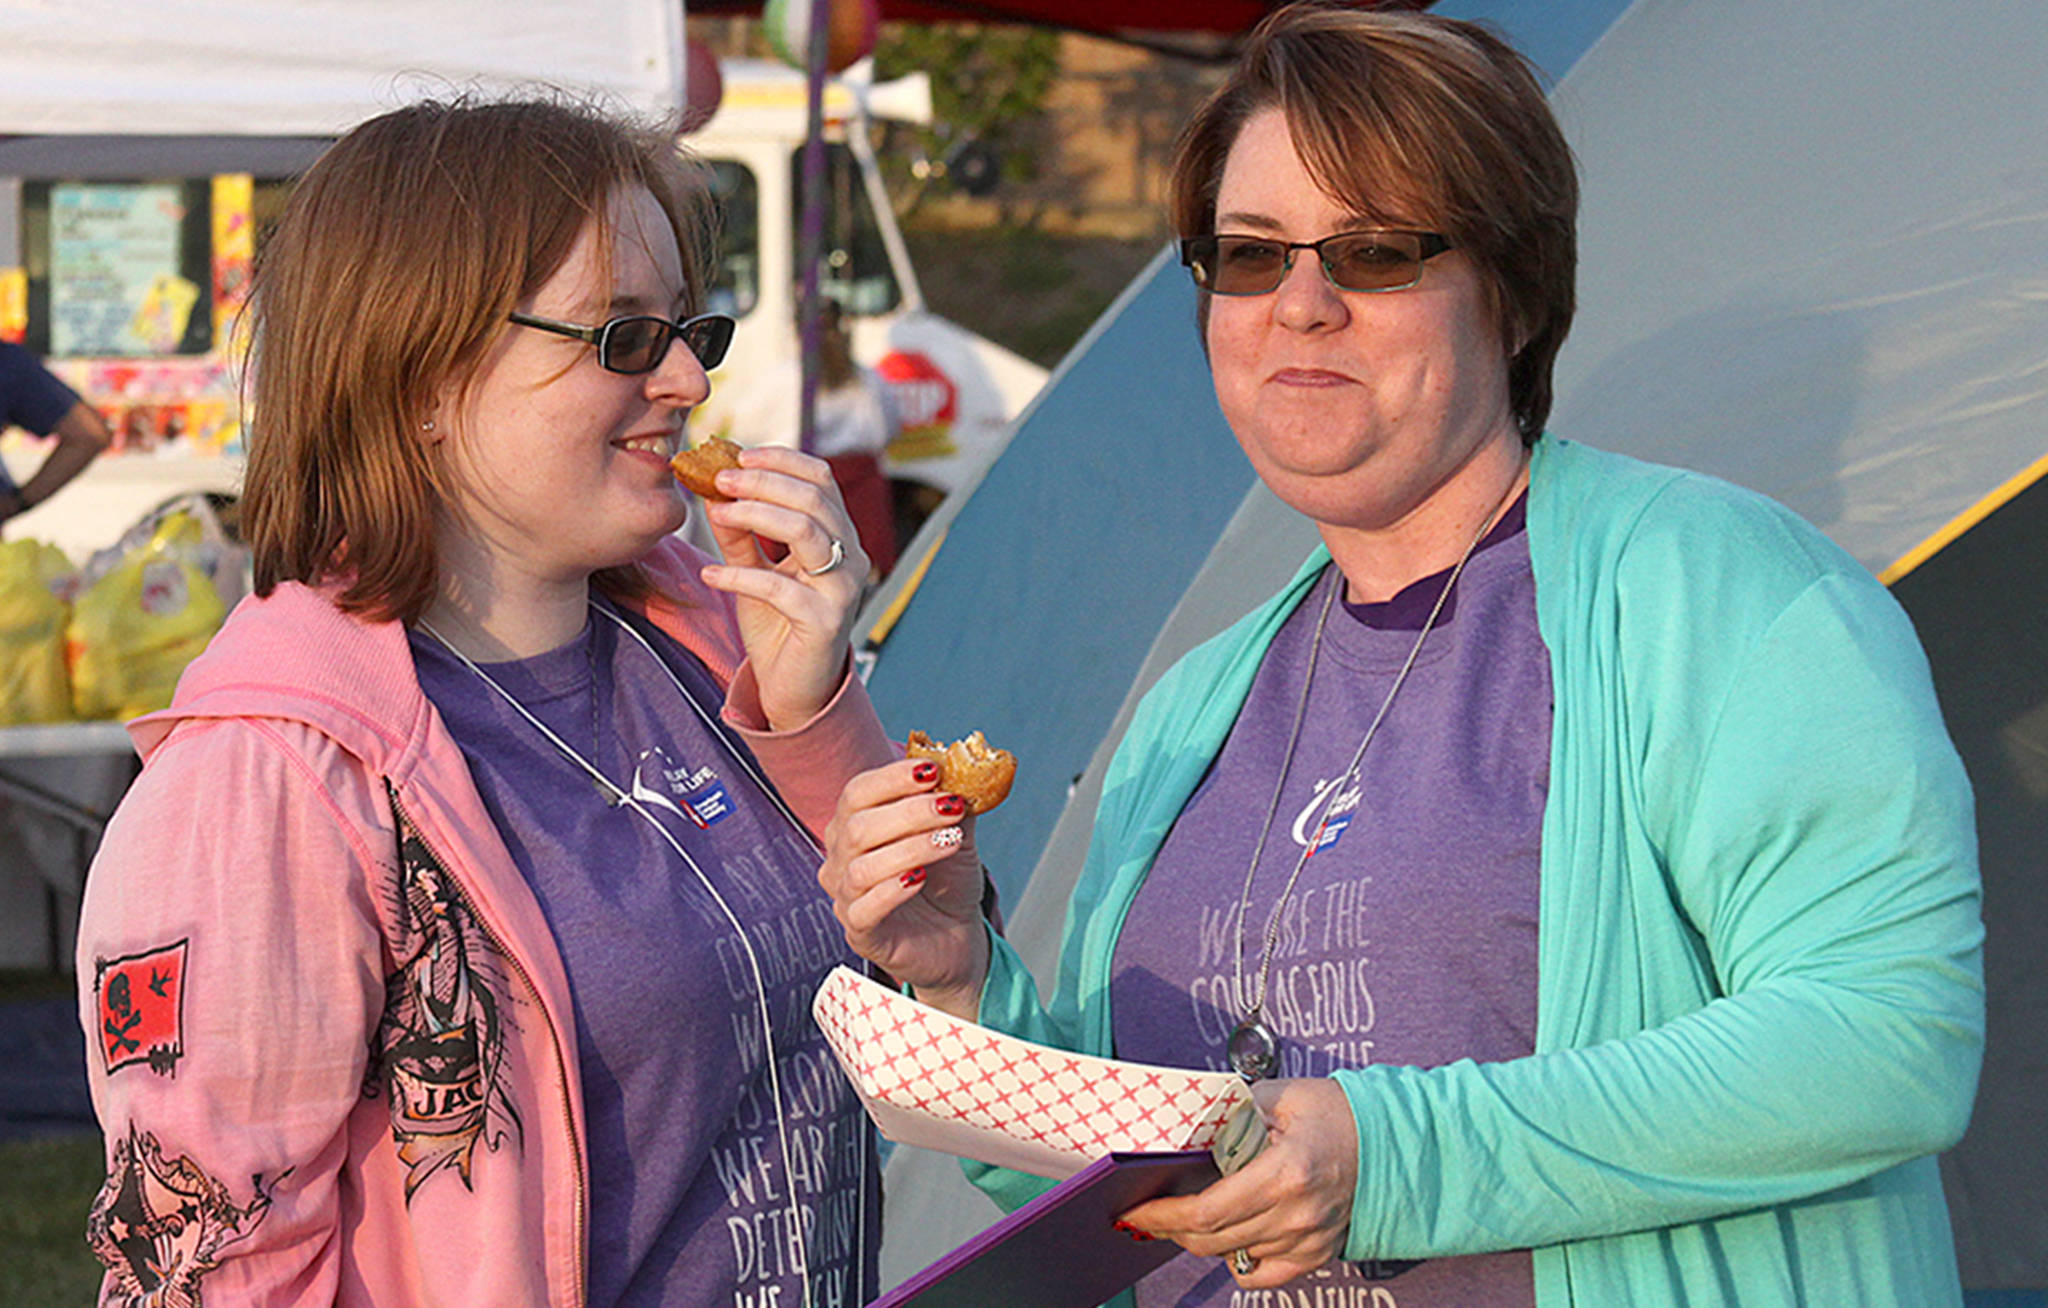 Dawnelle Conlisk shares a snack and some laughs with her daughter Mary at the The Relay for Life of Whidbey Island event Friday, June 2, 2017, at North Whidbey Middle School in Oak Harbor. Conlisk has been dealing with cancer for 22 years. Photo by Ron Newberry/Whidbey News-Times